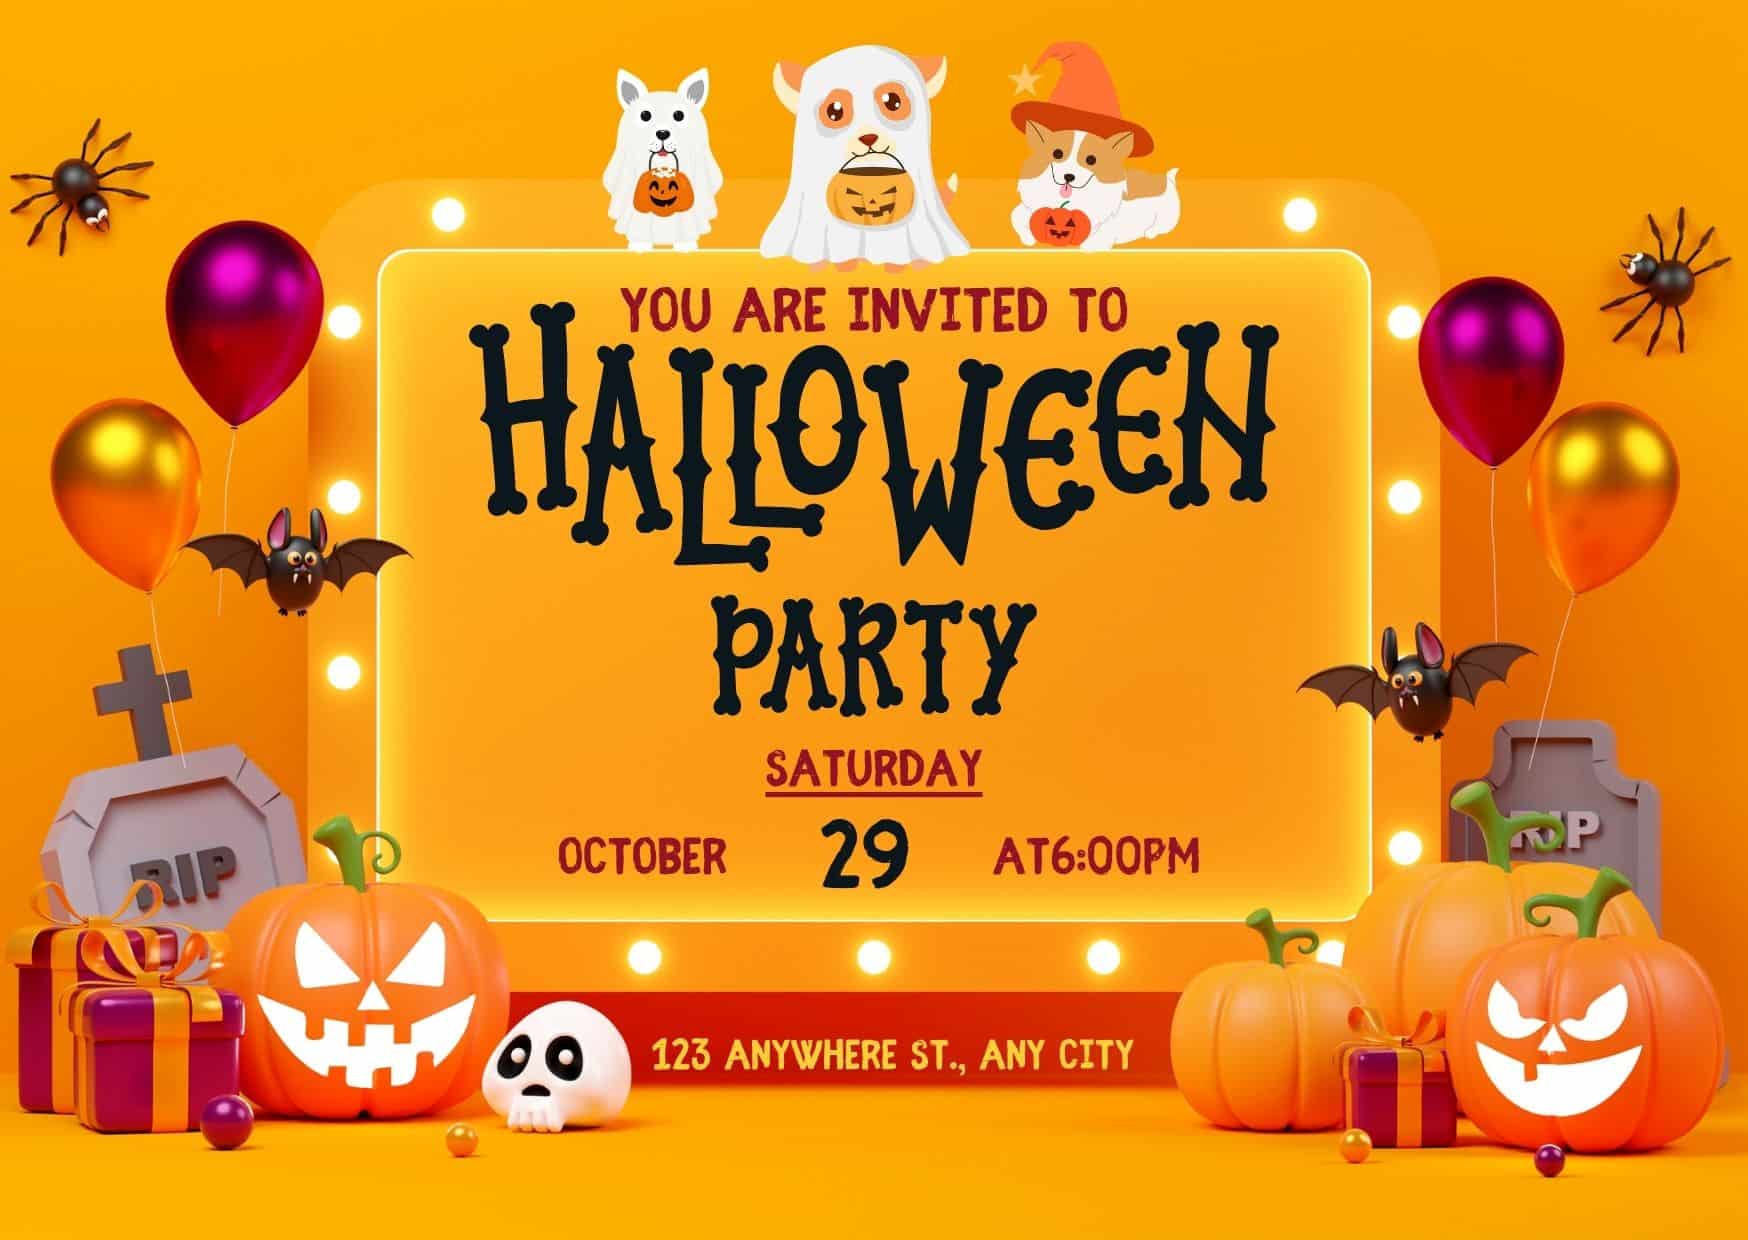 Get Guests Excited With Festive Invitations - Halloween Party For Dogs | Pawcool ™